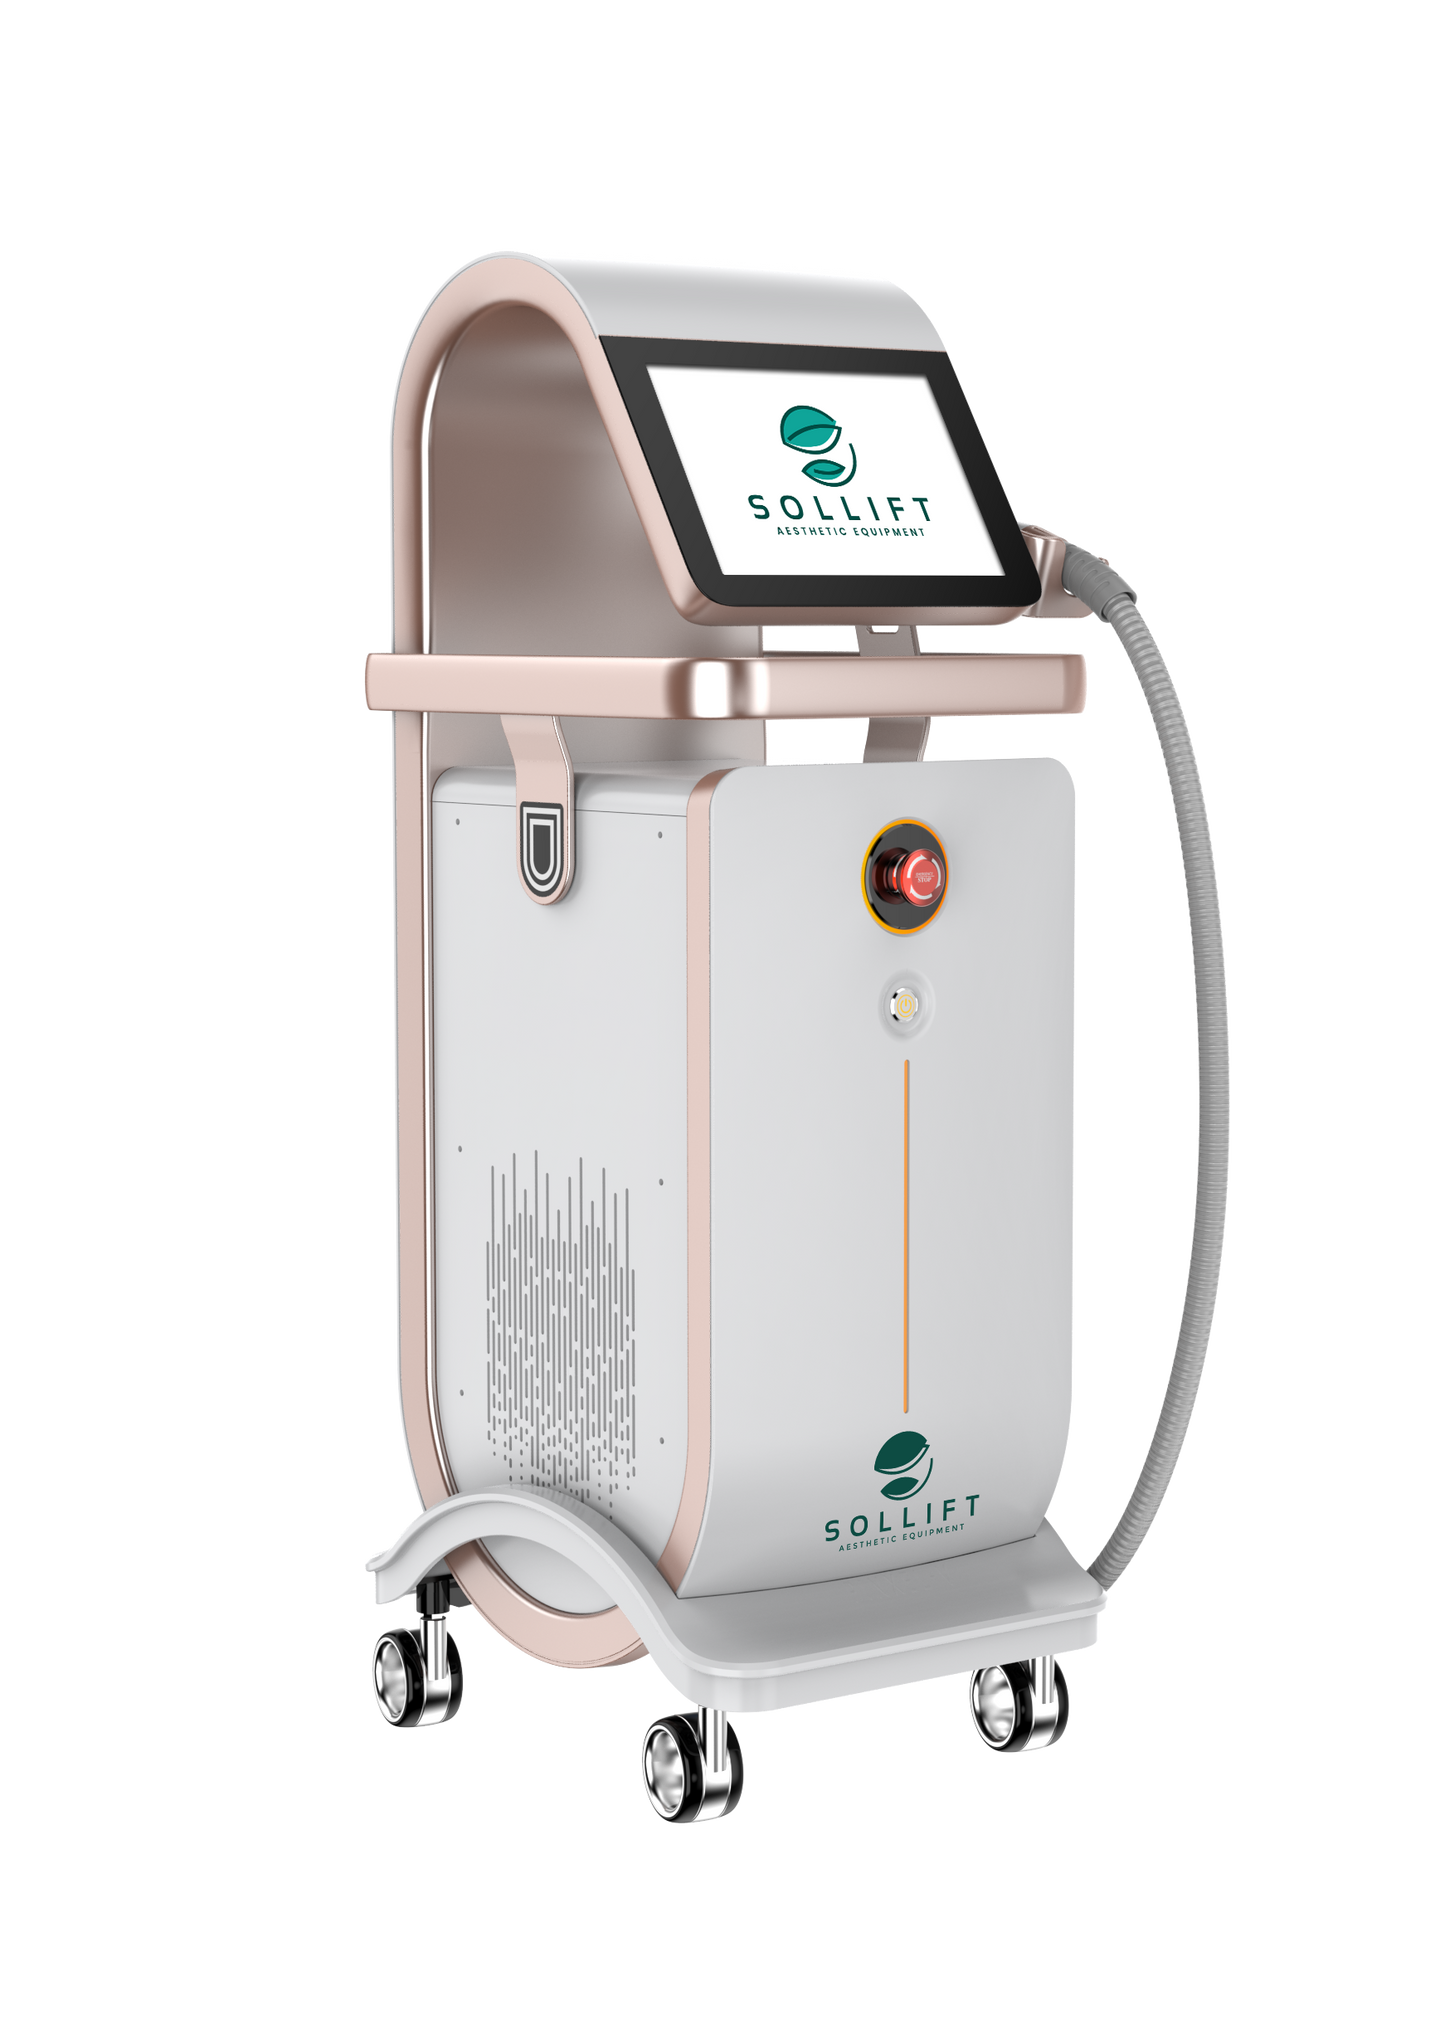 Verso Optix Pro Diode Laser Hair Removal System with Interchangeable Spot Sizes